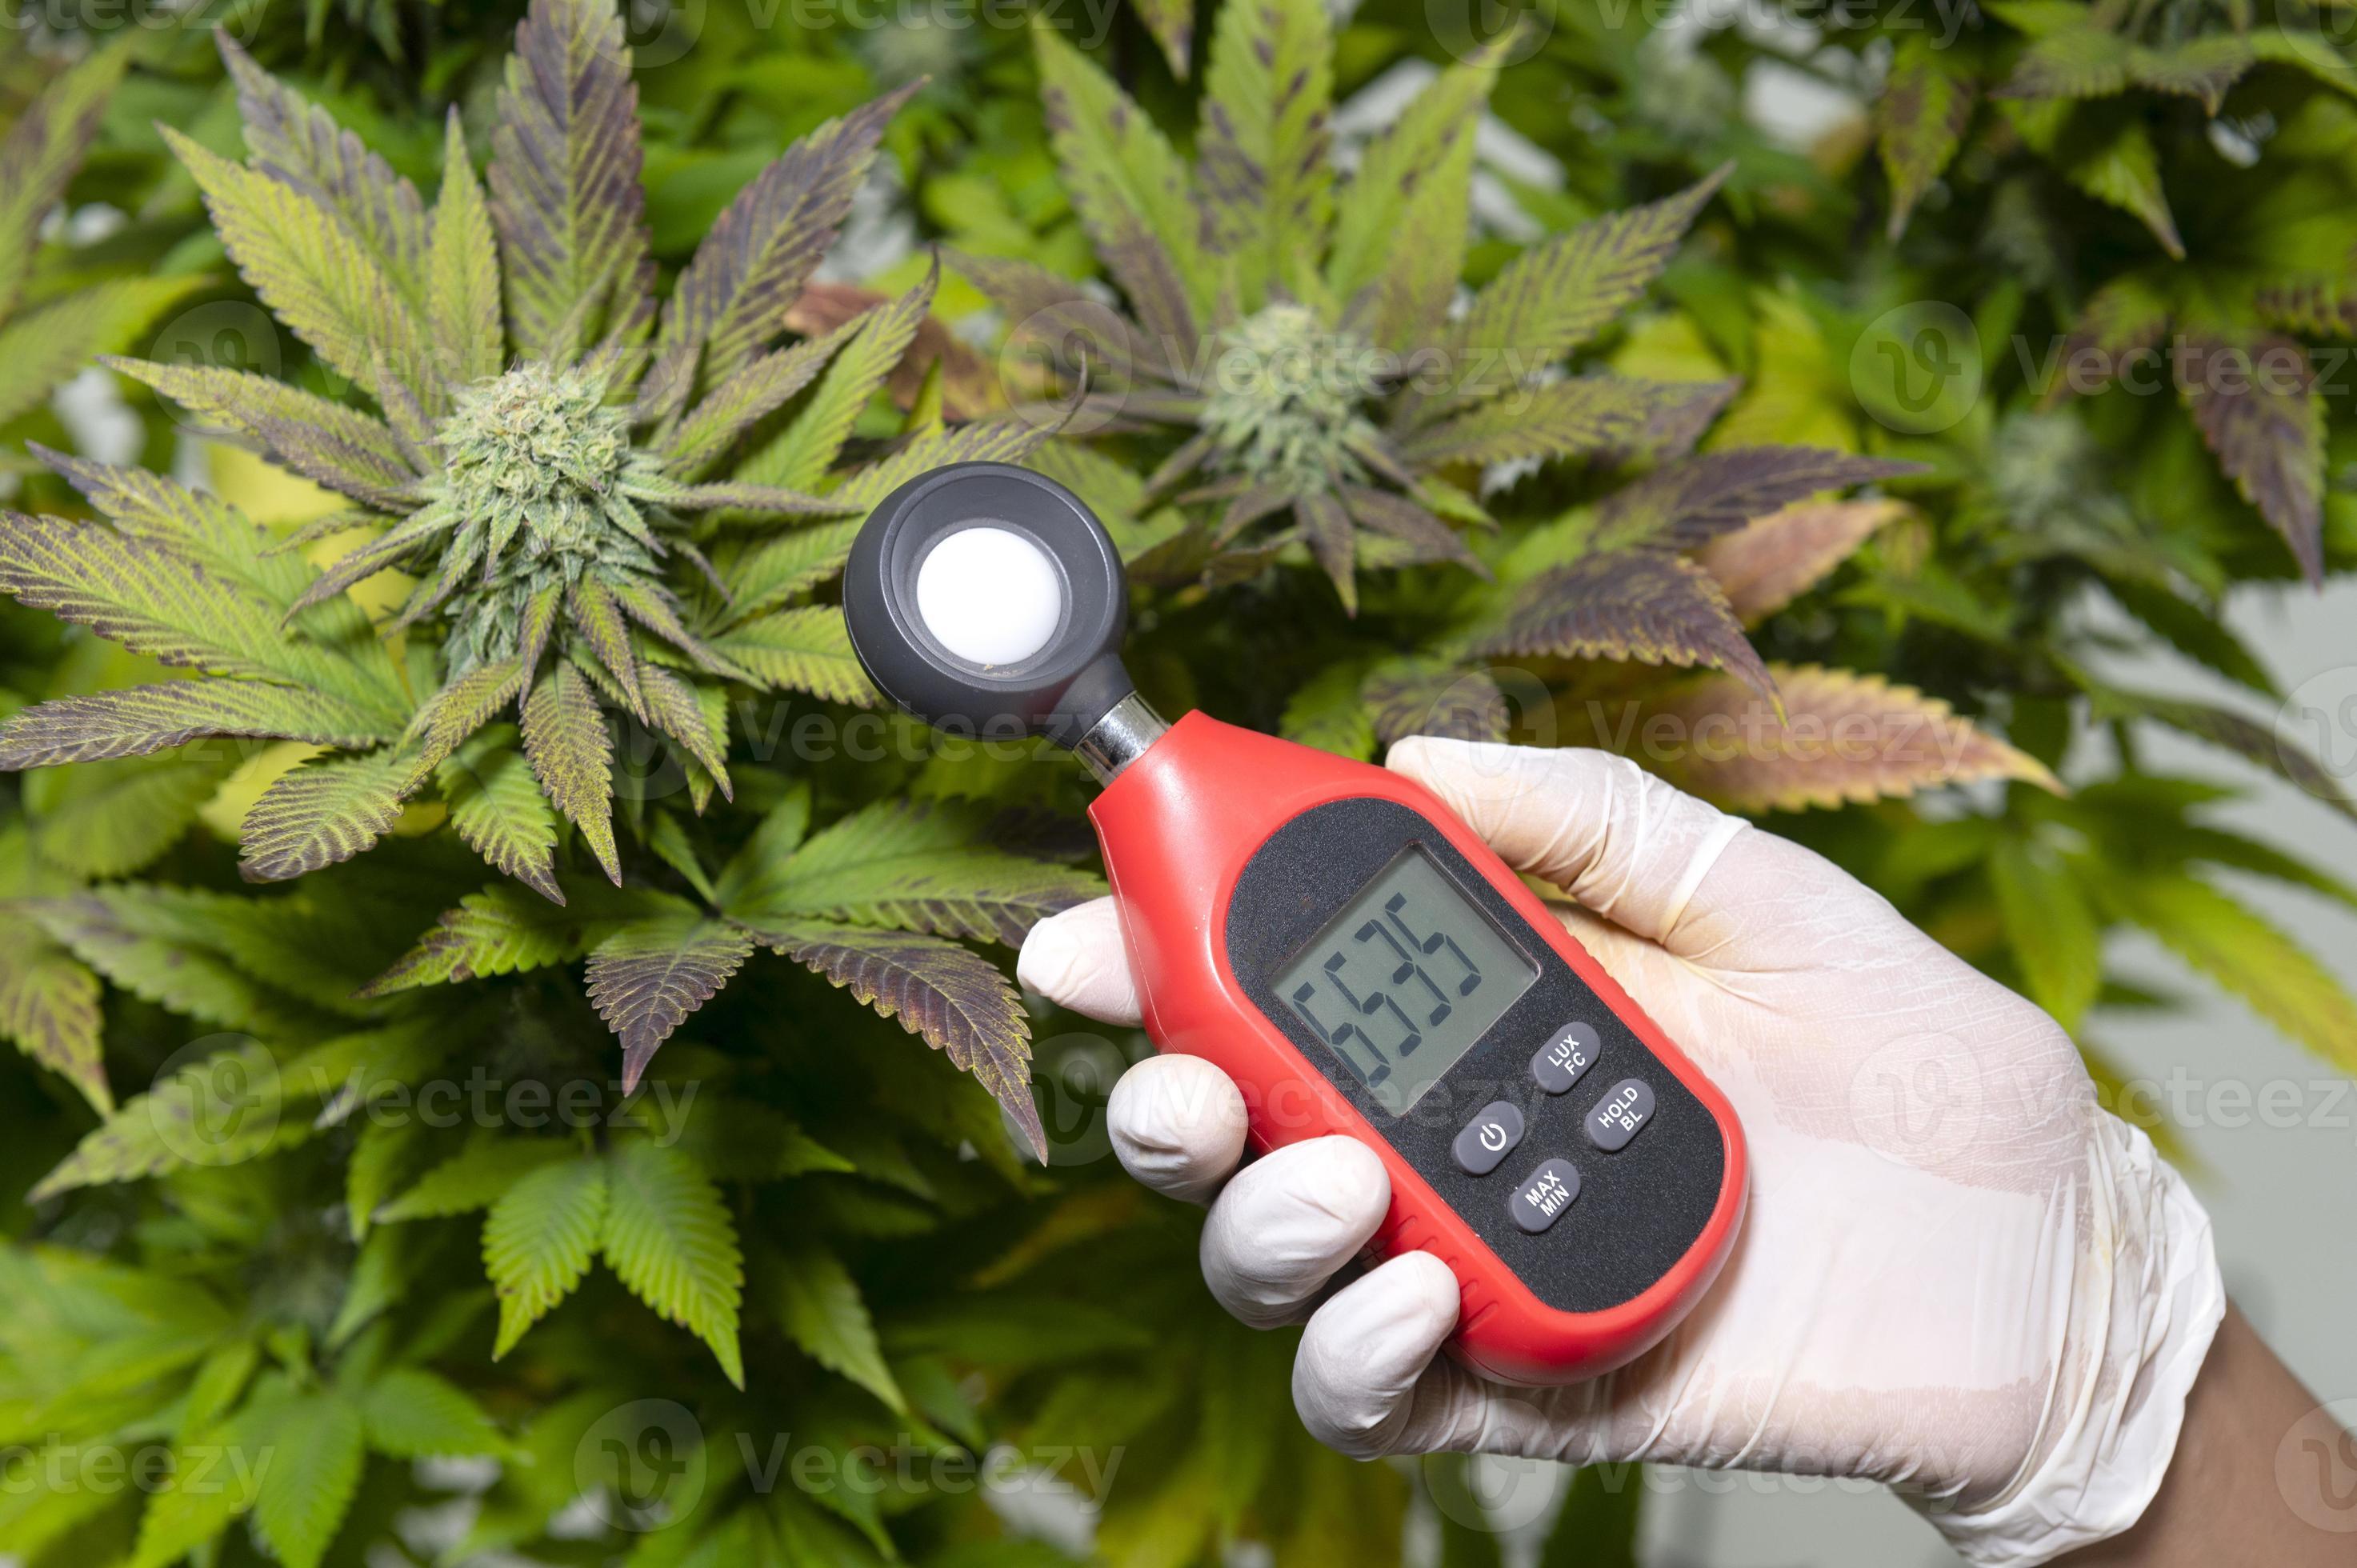 https://static.vecteezy.com/system/resources/previews/009/853/291/large_2x/medical-professional-uses-a-thermometer-and-a-hygrometer-to-show-the-temperature-and-humidity-next-to-the-cannabis-plant-the-humidity-indicator-is-displayed-on-the-device-hygrometer-photo.jpg